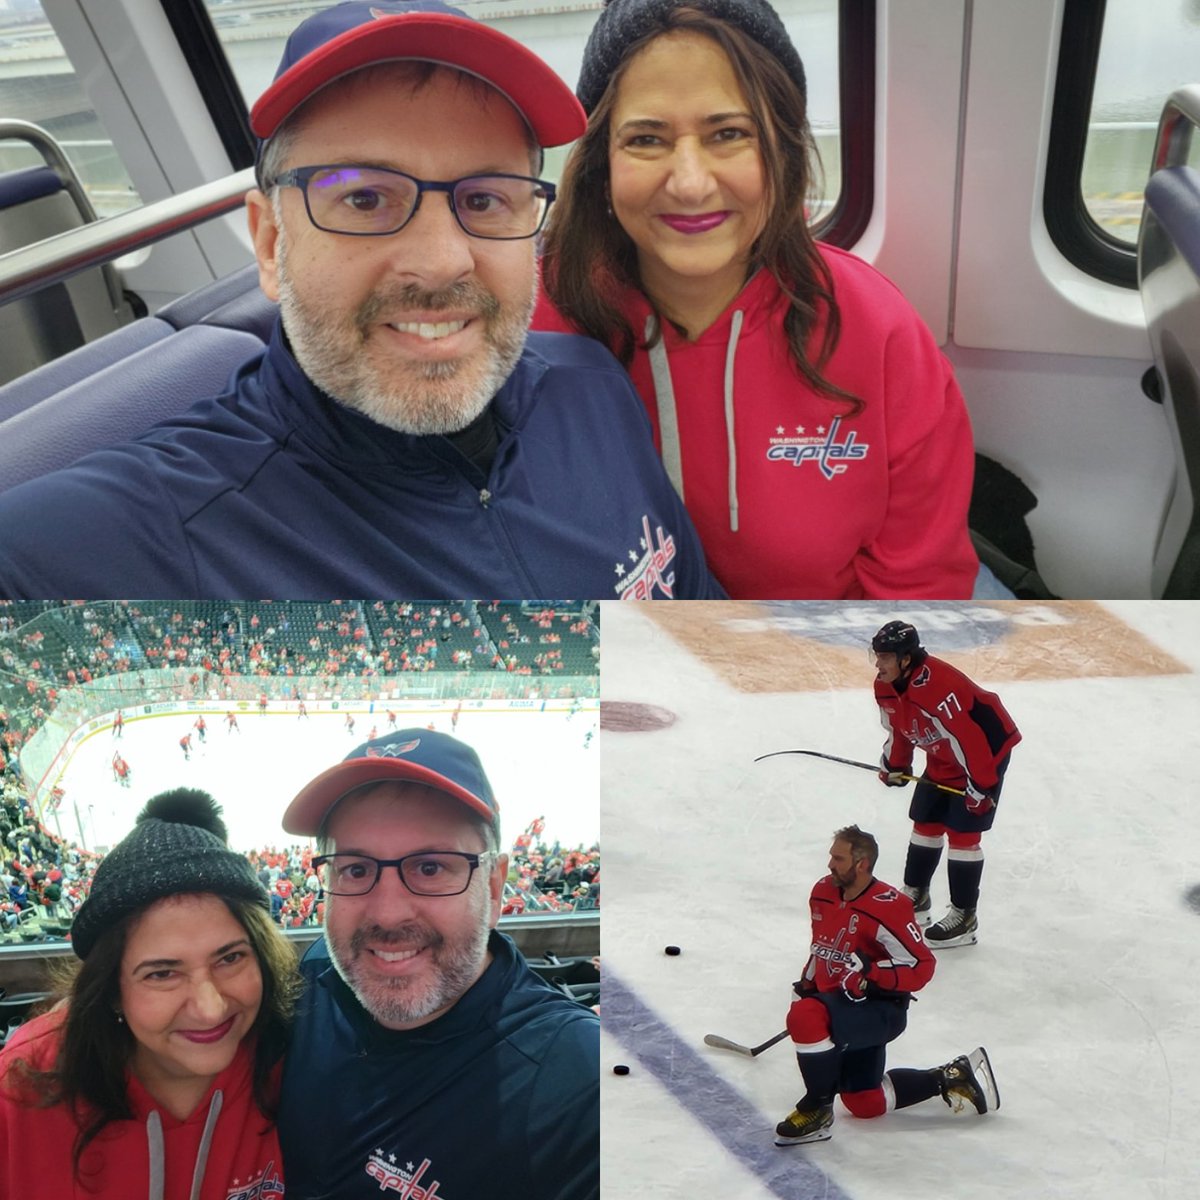 Chelle and I are taking in the game before The Game. @Capitals